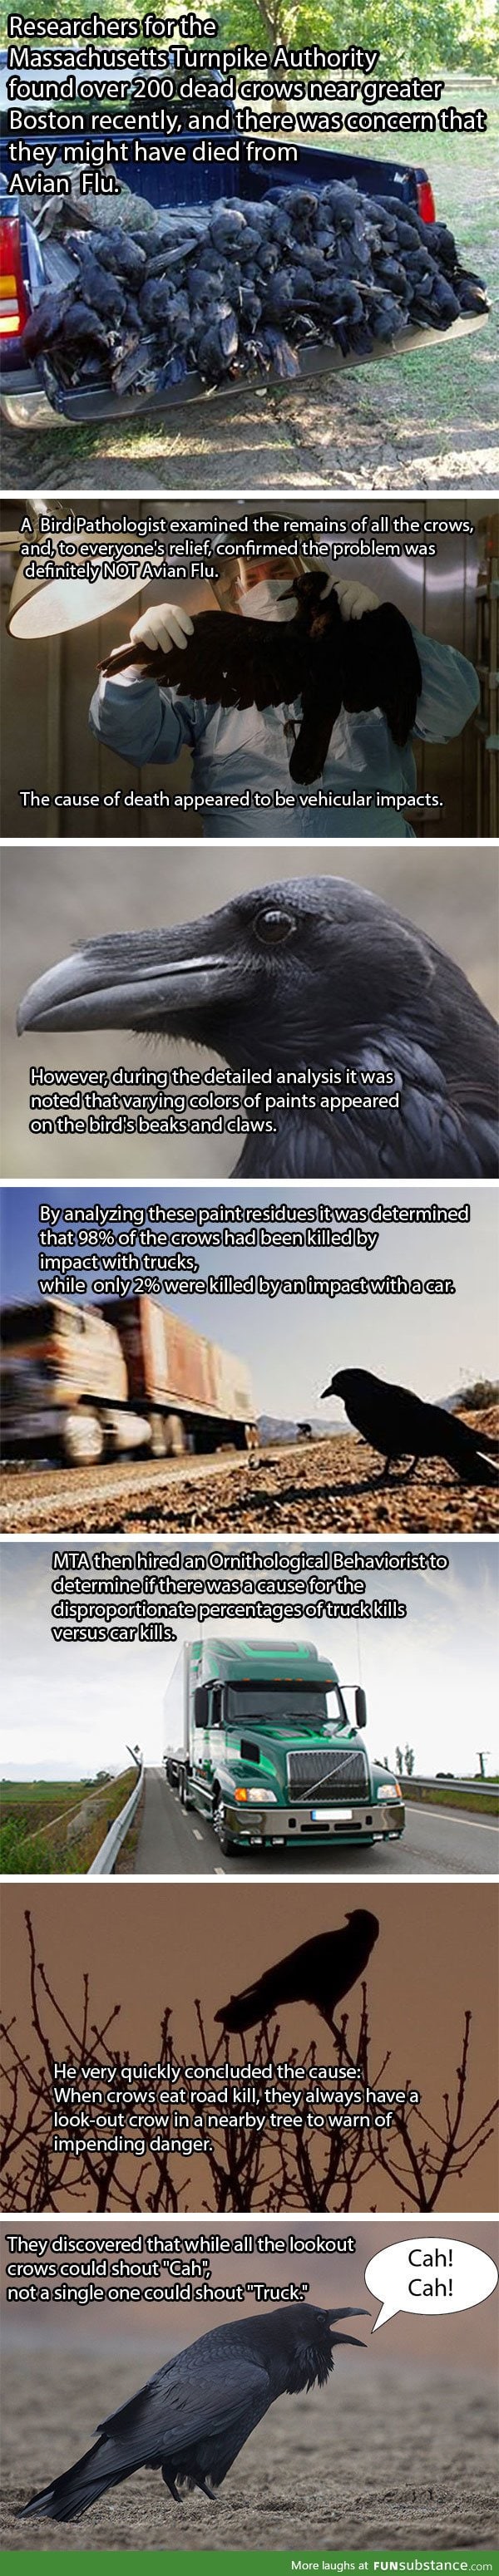 The mysterious death of crows solved!